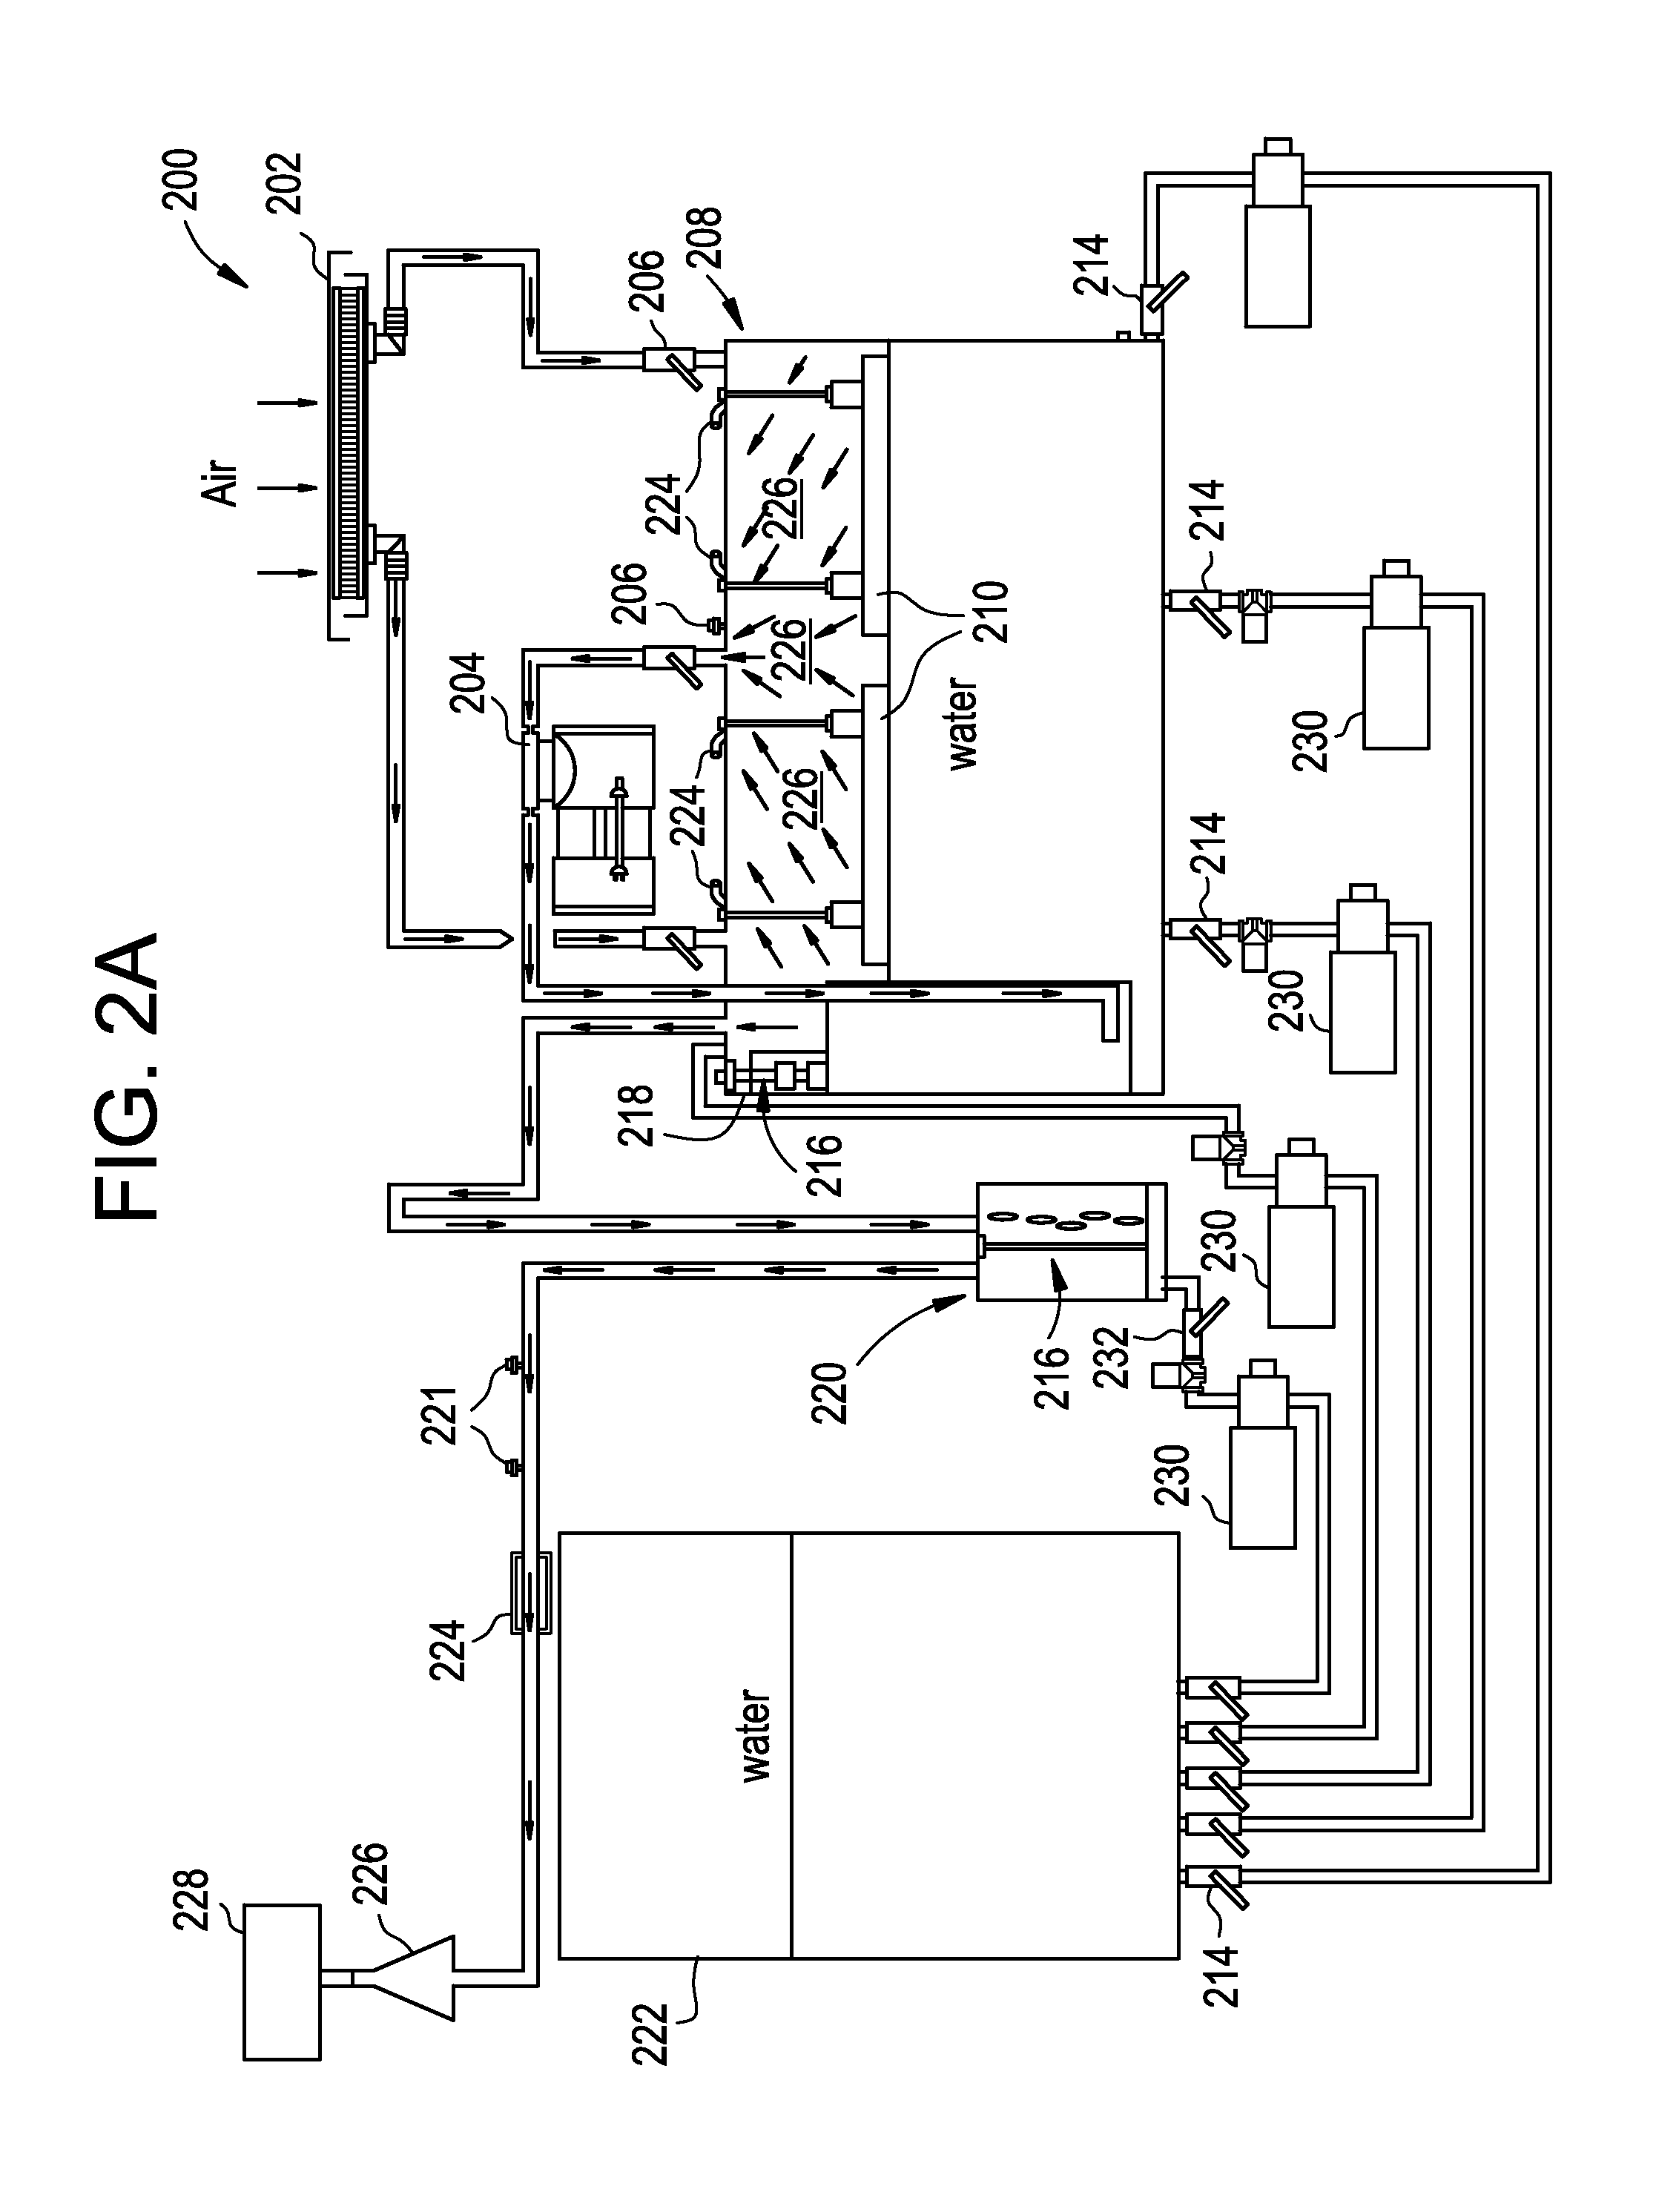 Hydrogen/oxygen on-demand system, high speed efficient hydrogen reactor system and methods therefor